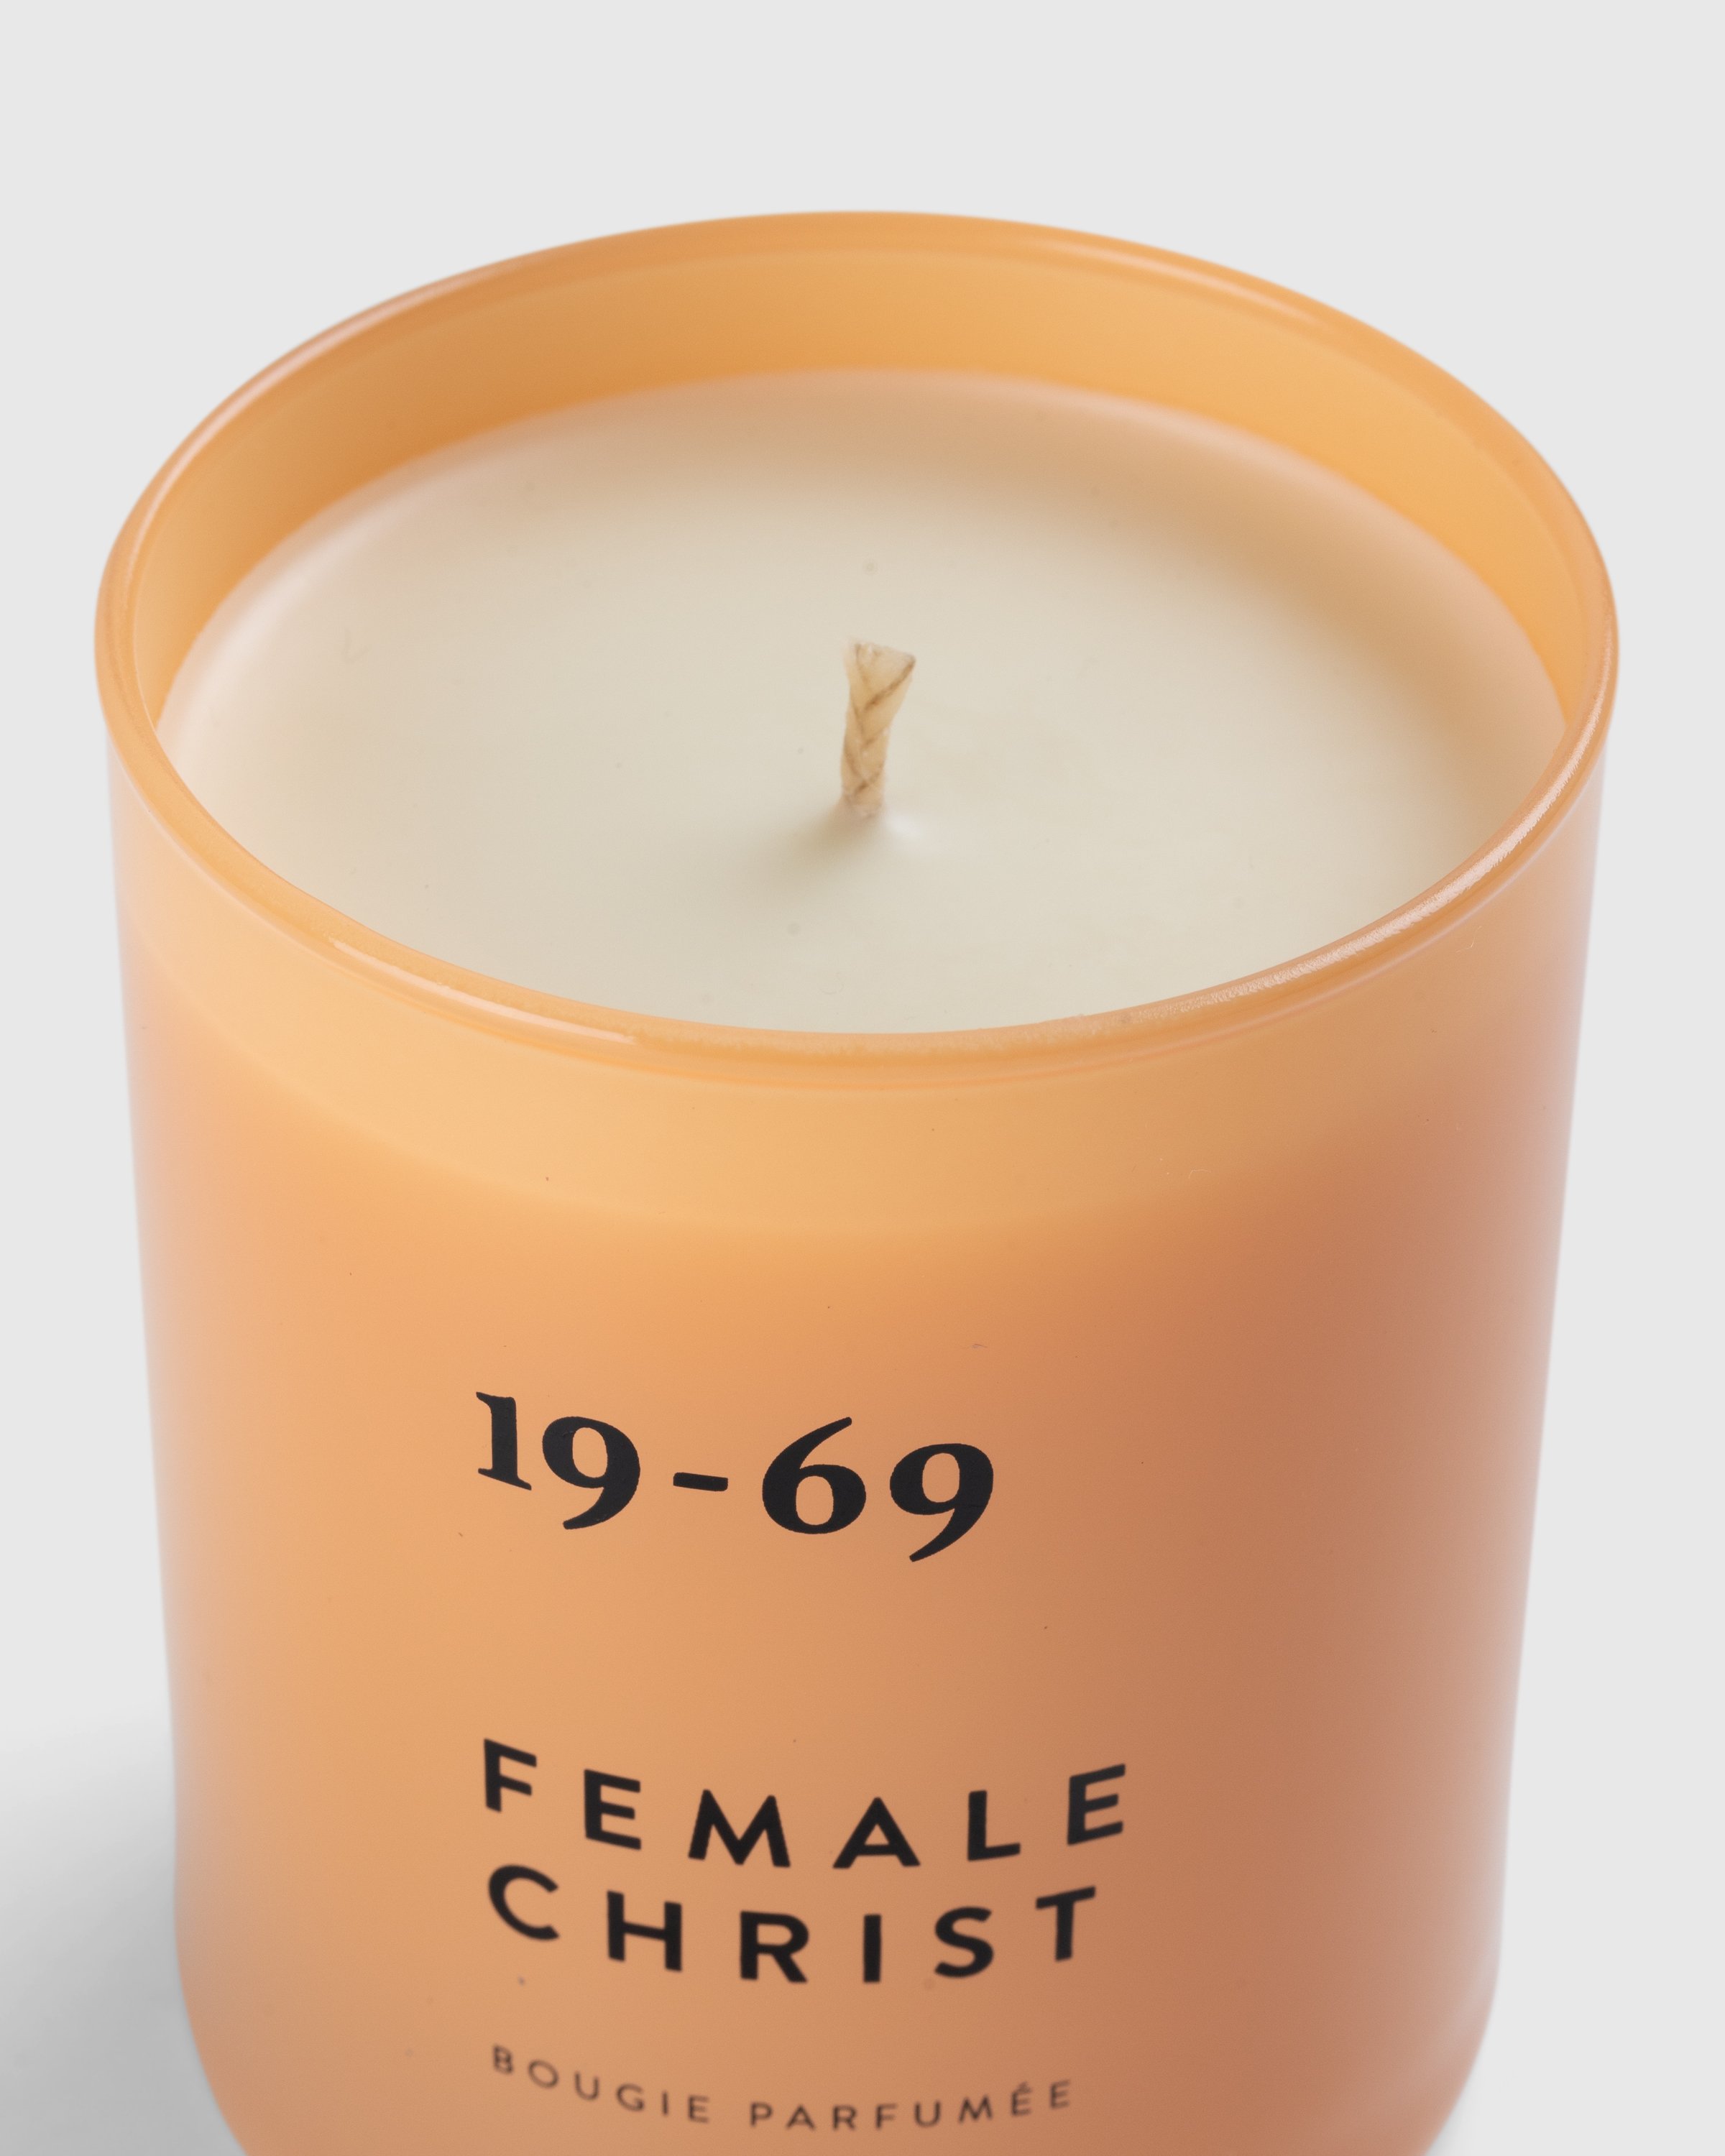 19-69 - Female Christ BP Candle - Lifestyle - Pink - Image 3